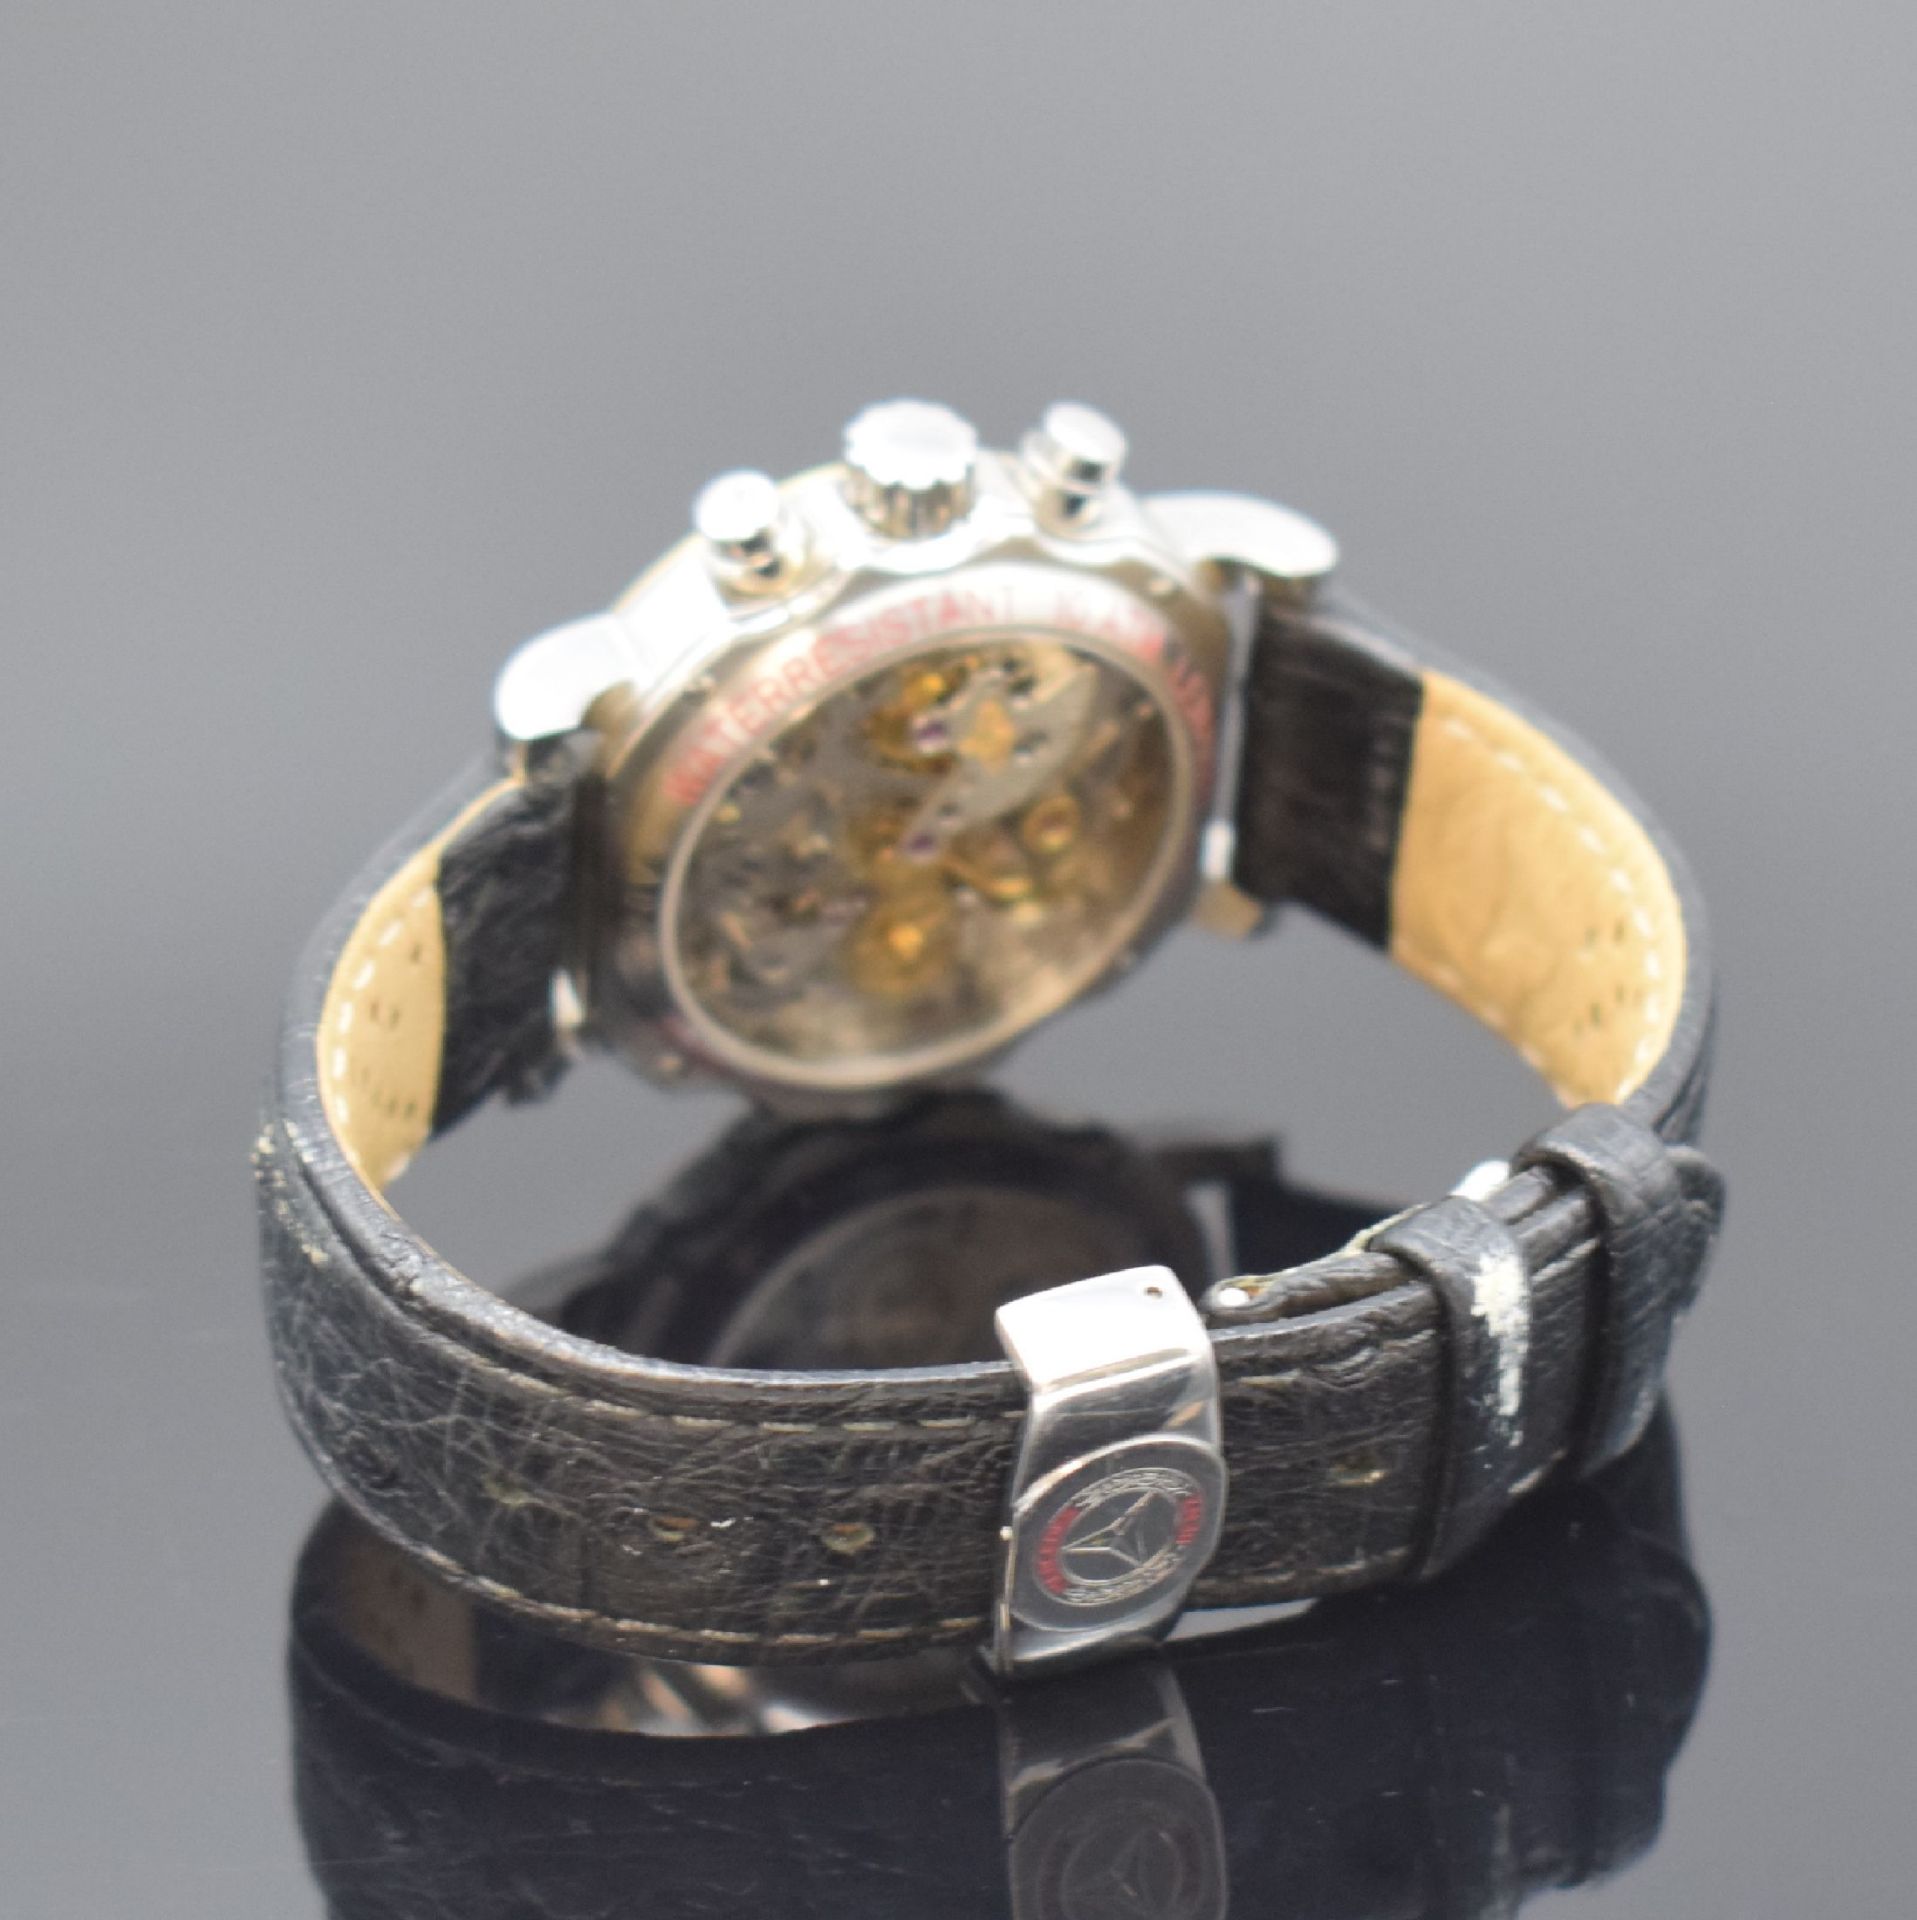 MERCEDES BENZ / LEMANIA 1872 Armbandchronograph in - Image 3 of 6